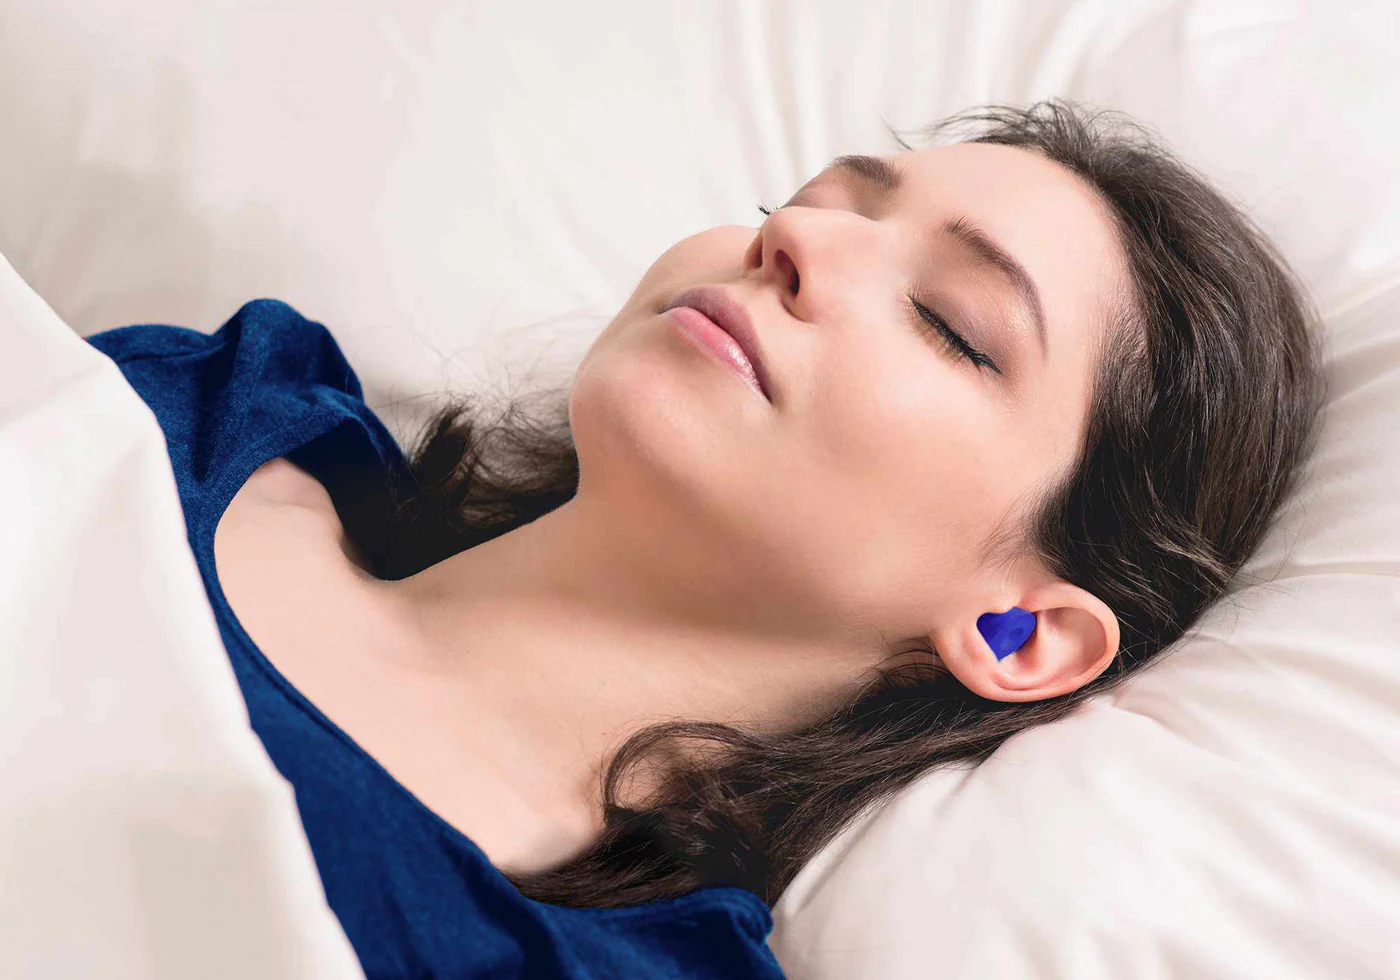 A girl napping in bed wearing a blue earplug.